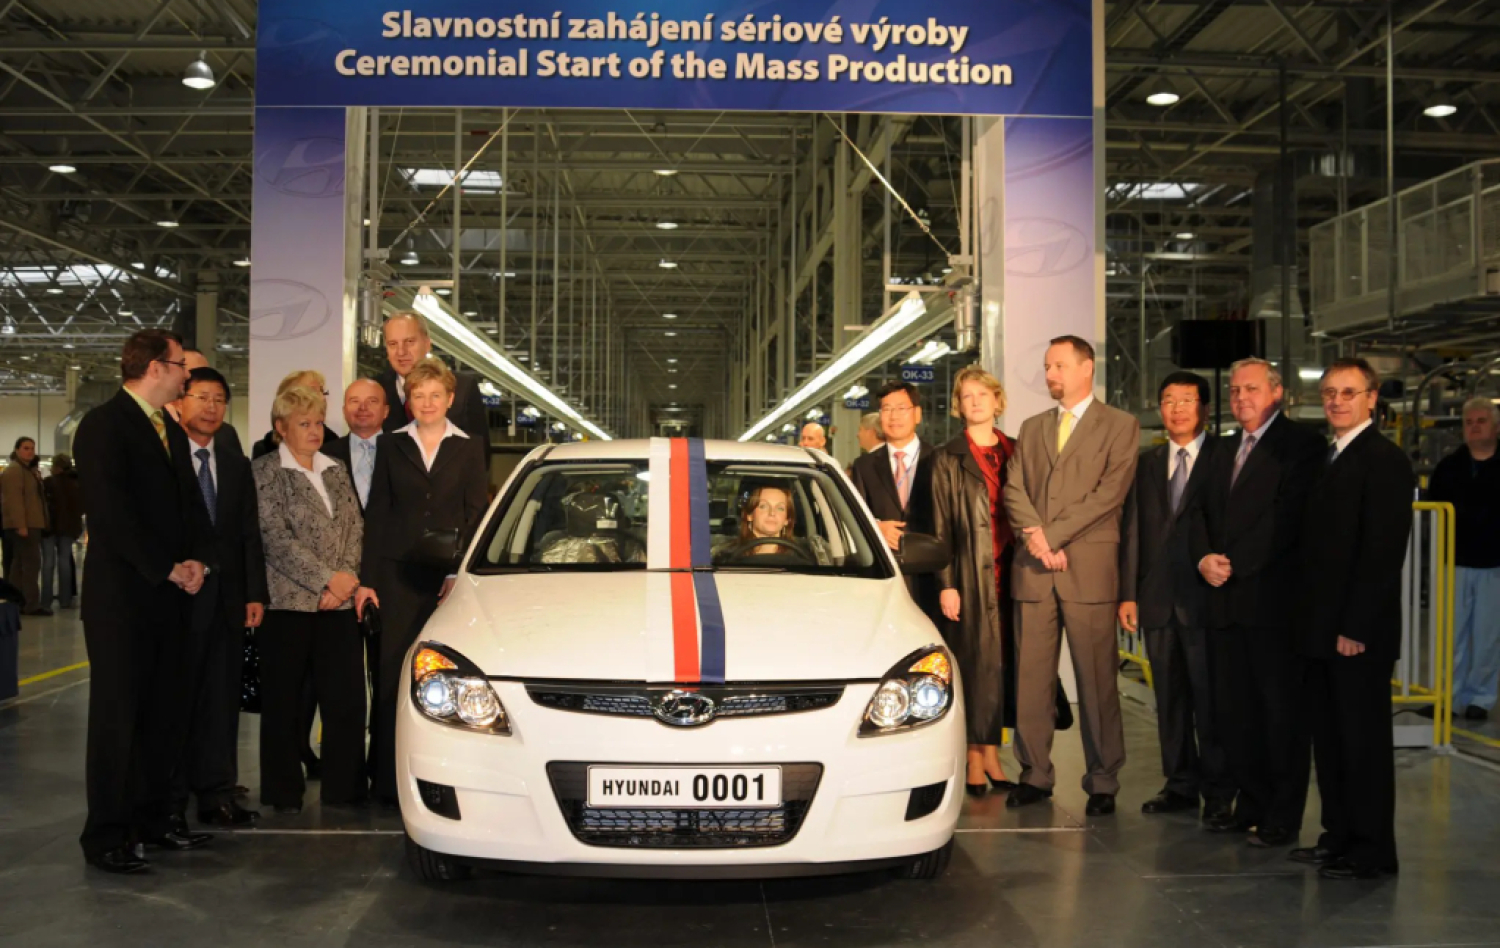 Hyundai celebrated the 15th anniversary of the start of serial production in the Czech Republic